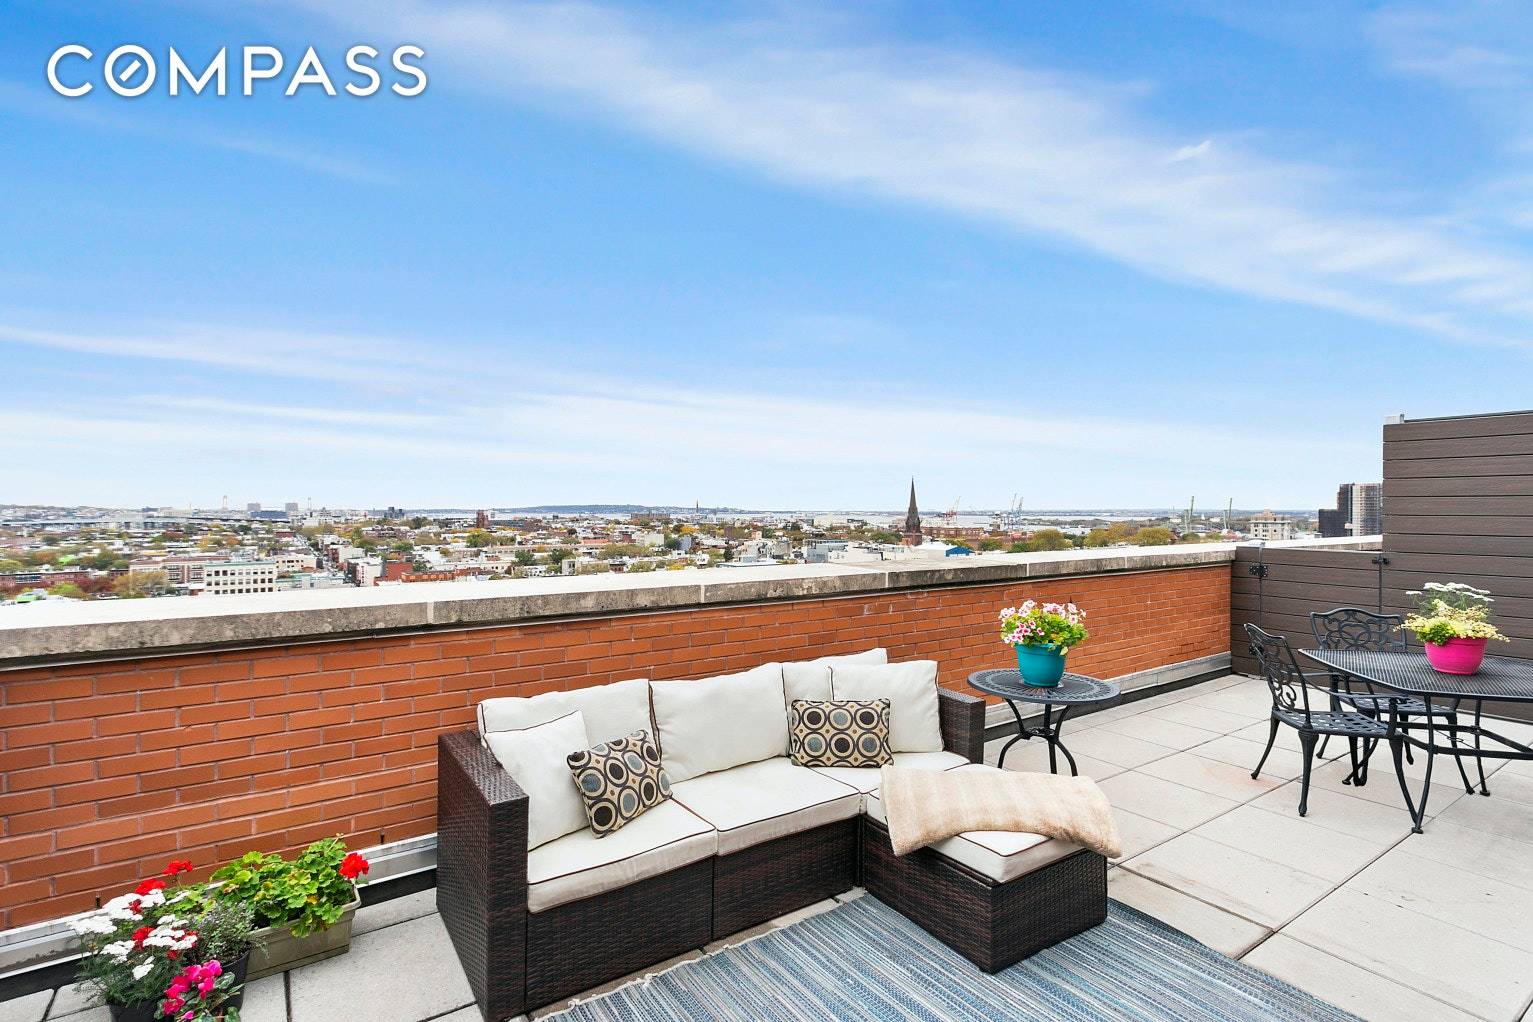 FRESH AIR amp ; SUNSHINE ON YOUR FACE WITHOUT LEAVING HOMEPRIVATE PENTHOUSE TERRACE WITH EPIC VIEWS amp ; LIGHTDUPLEXED CONDO RETREAT IN SUPER PRIME LOCATION Is it possible to have ...